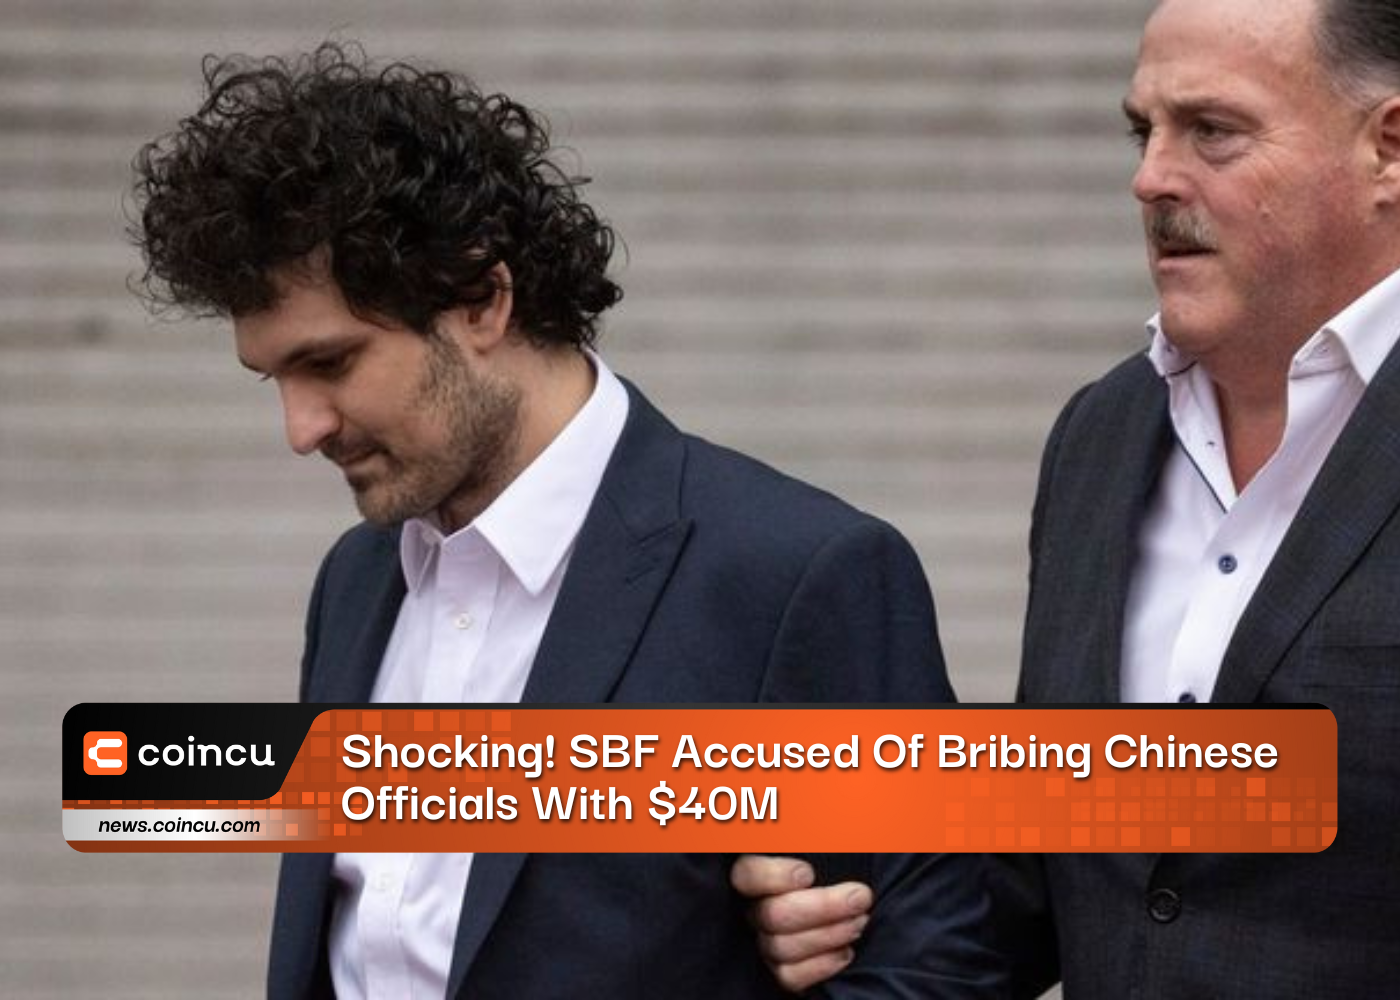 SBF Accused Of Bribing Chinese